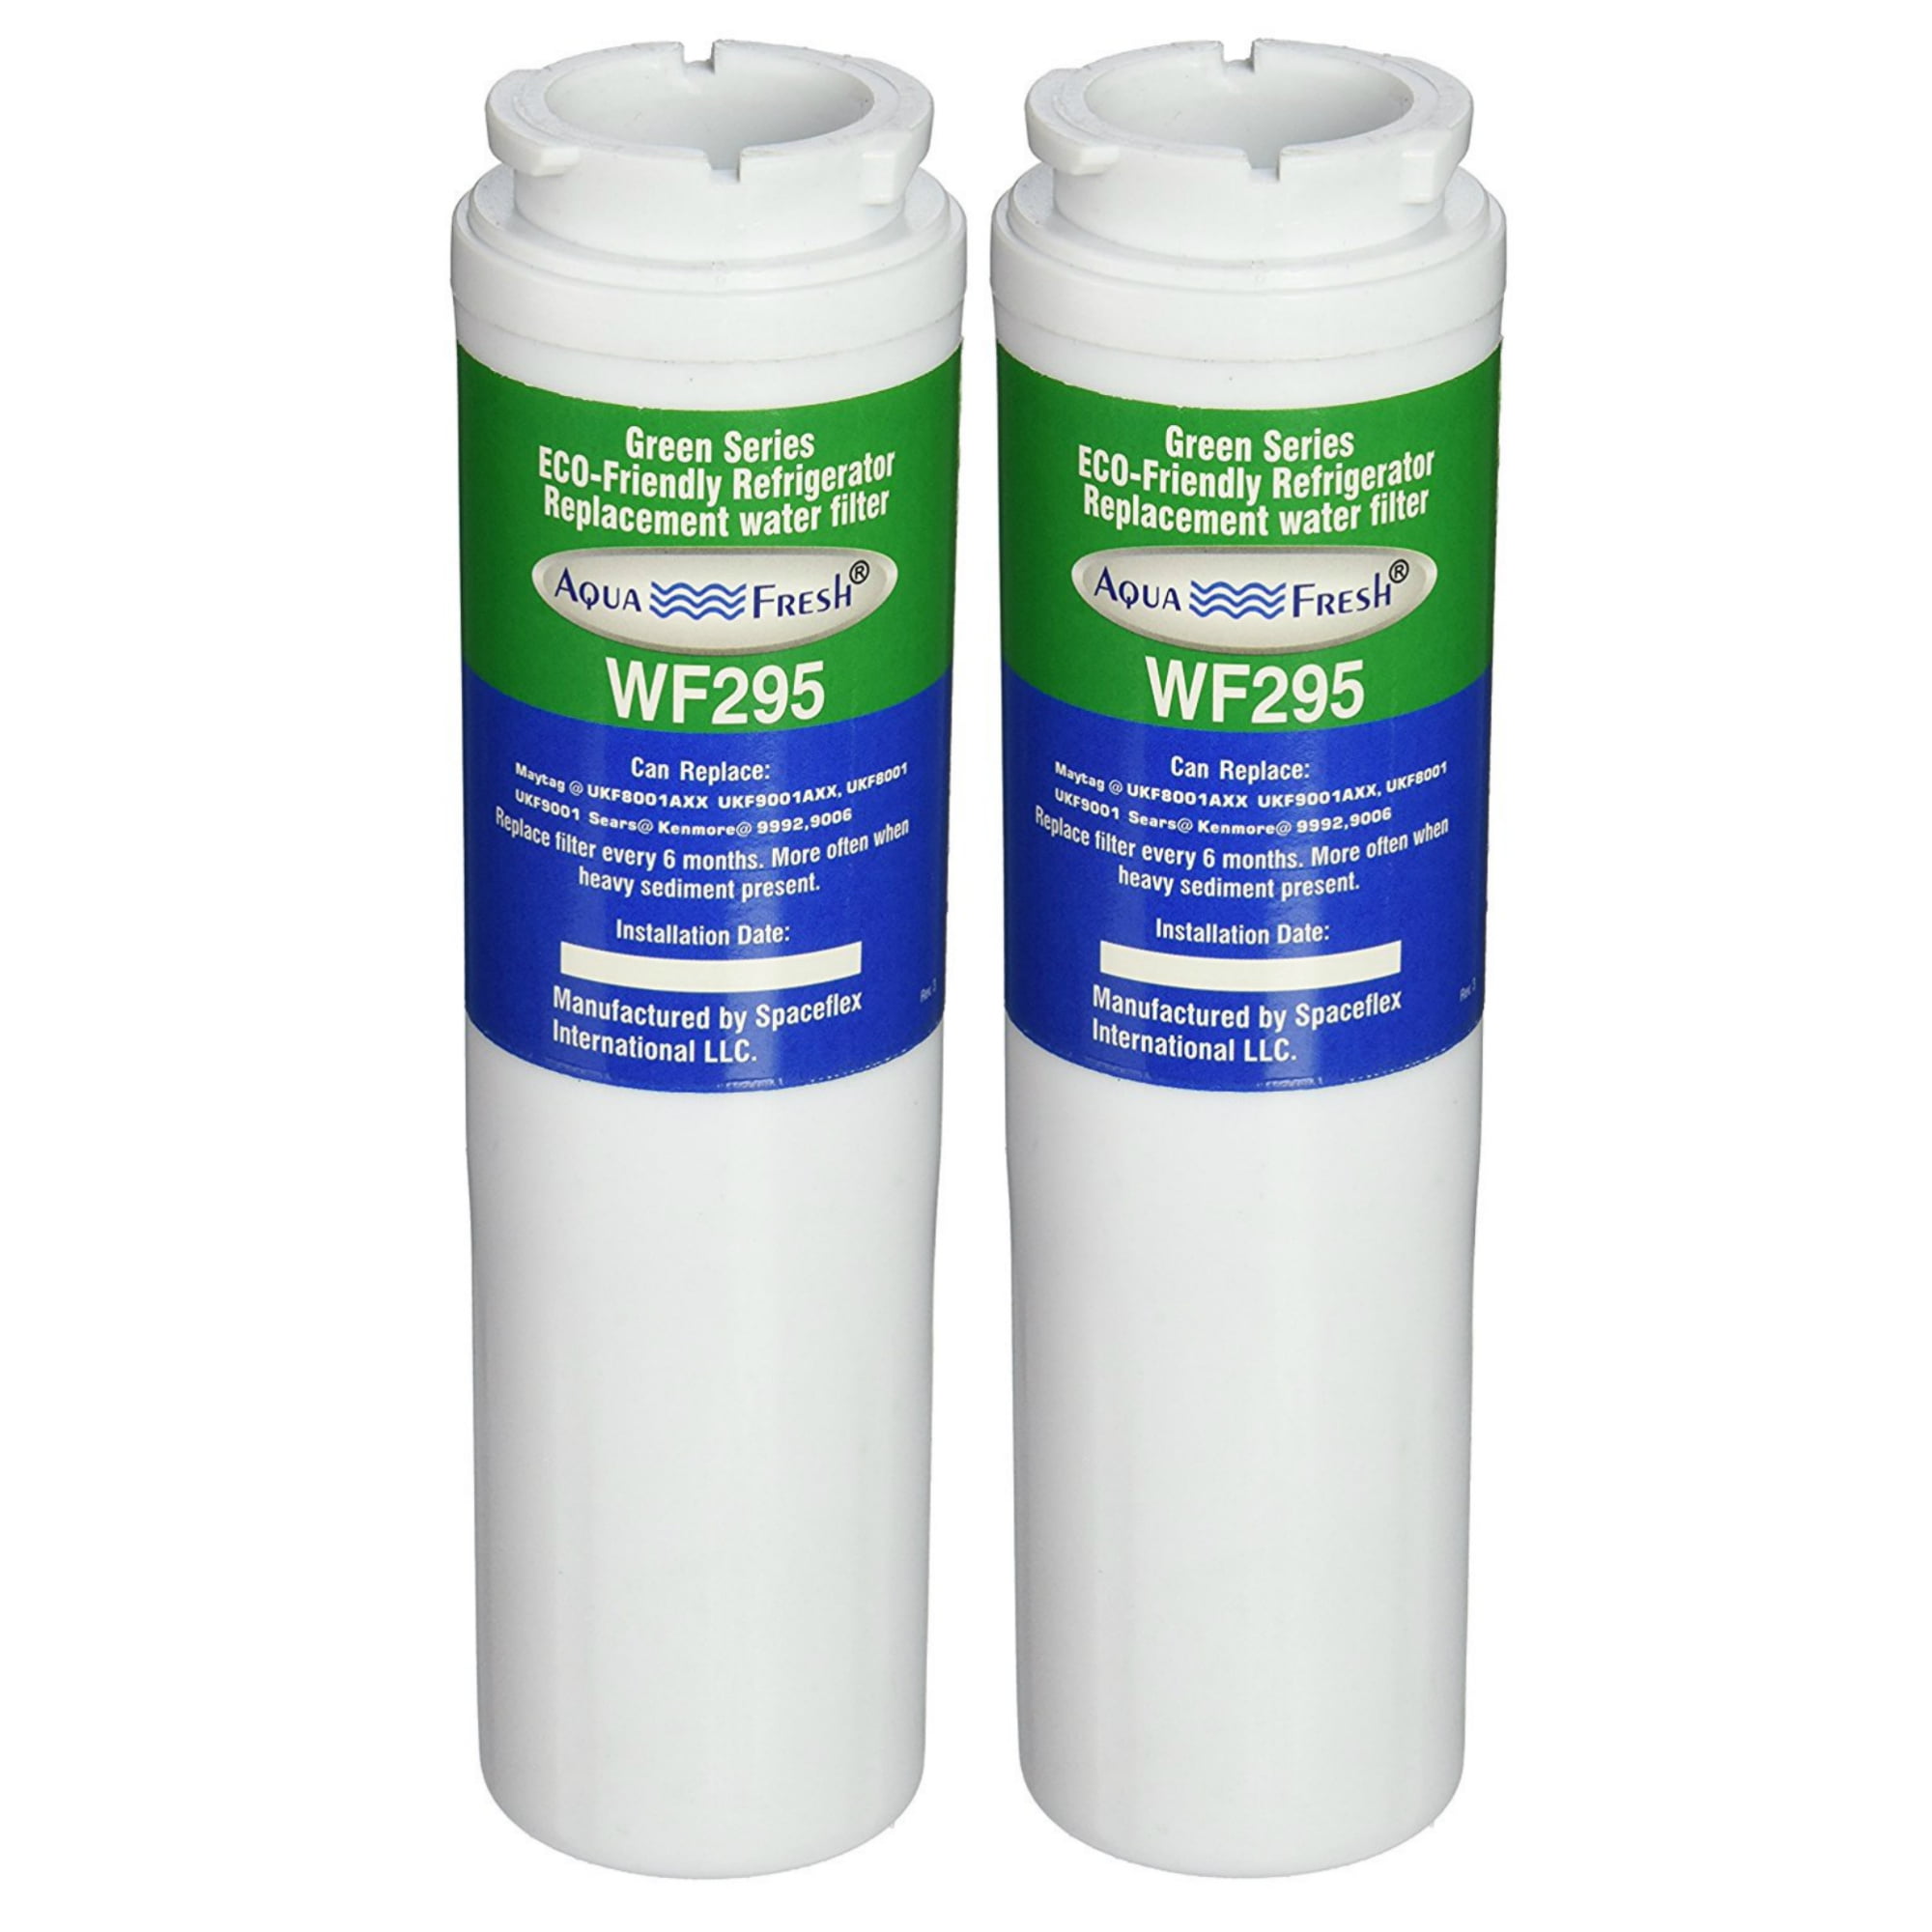 Refresh Replacement Water Filter 4 Pack Fits Maytag WSM-2 Refrigerators 